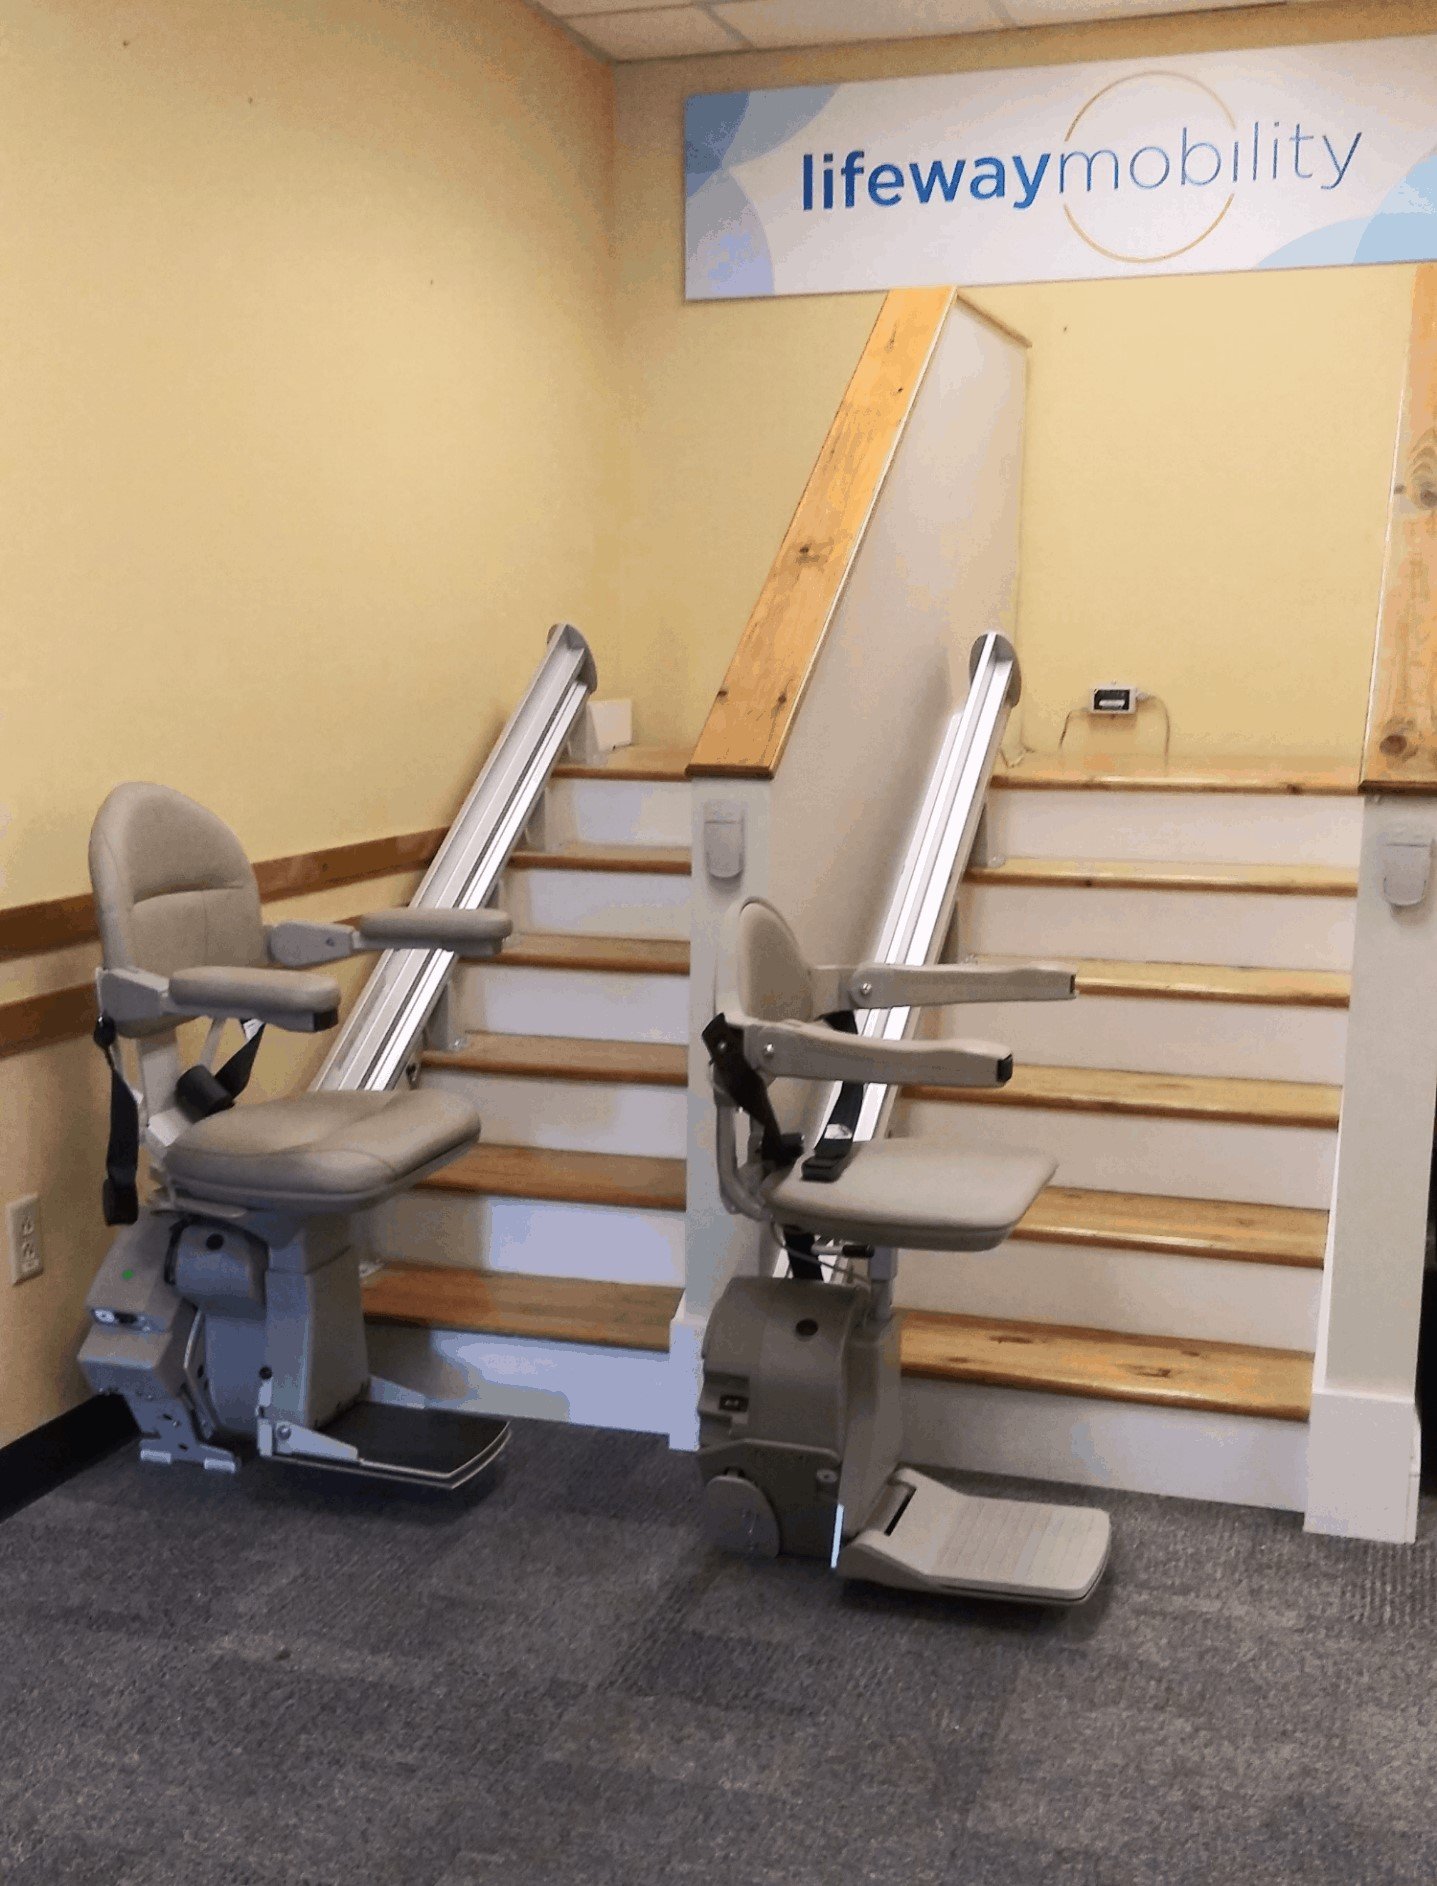 stair lifts in Lifeway Mobility Massachusetts Showroom